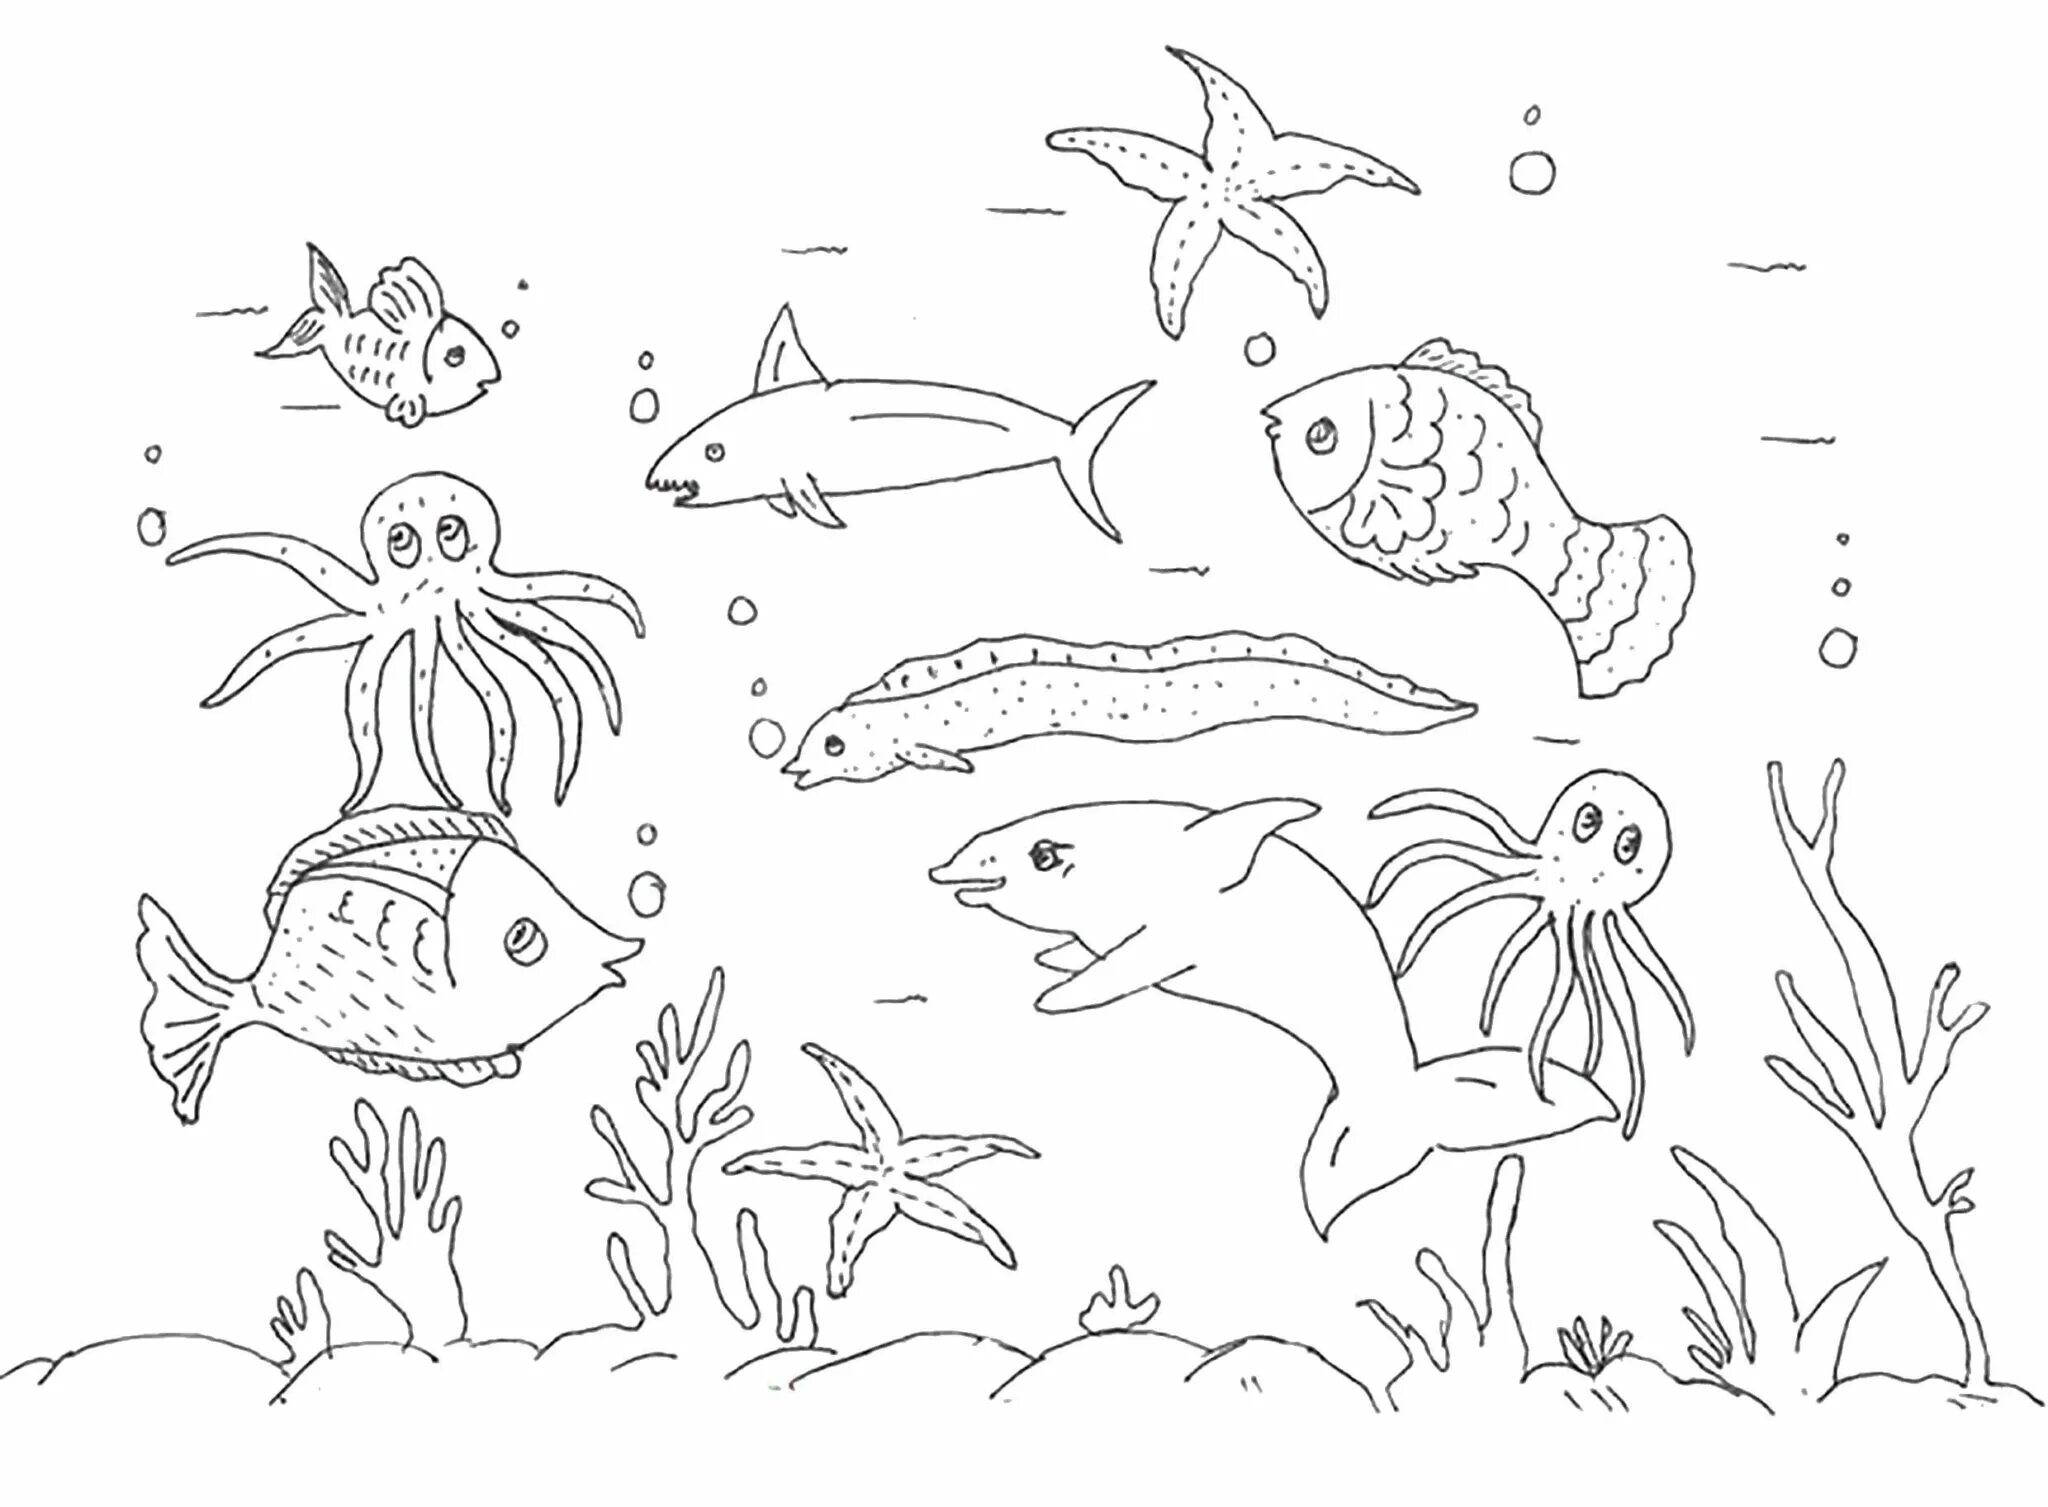 Wonderful ocean coloring pages for kids